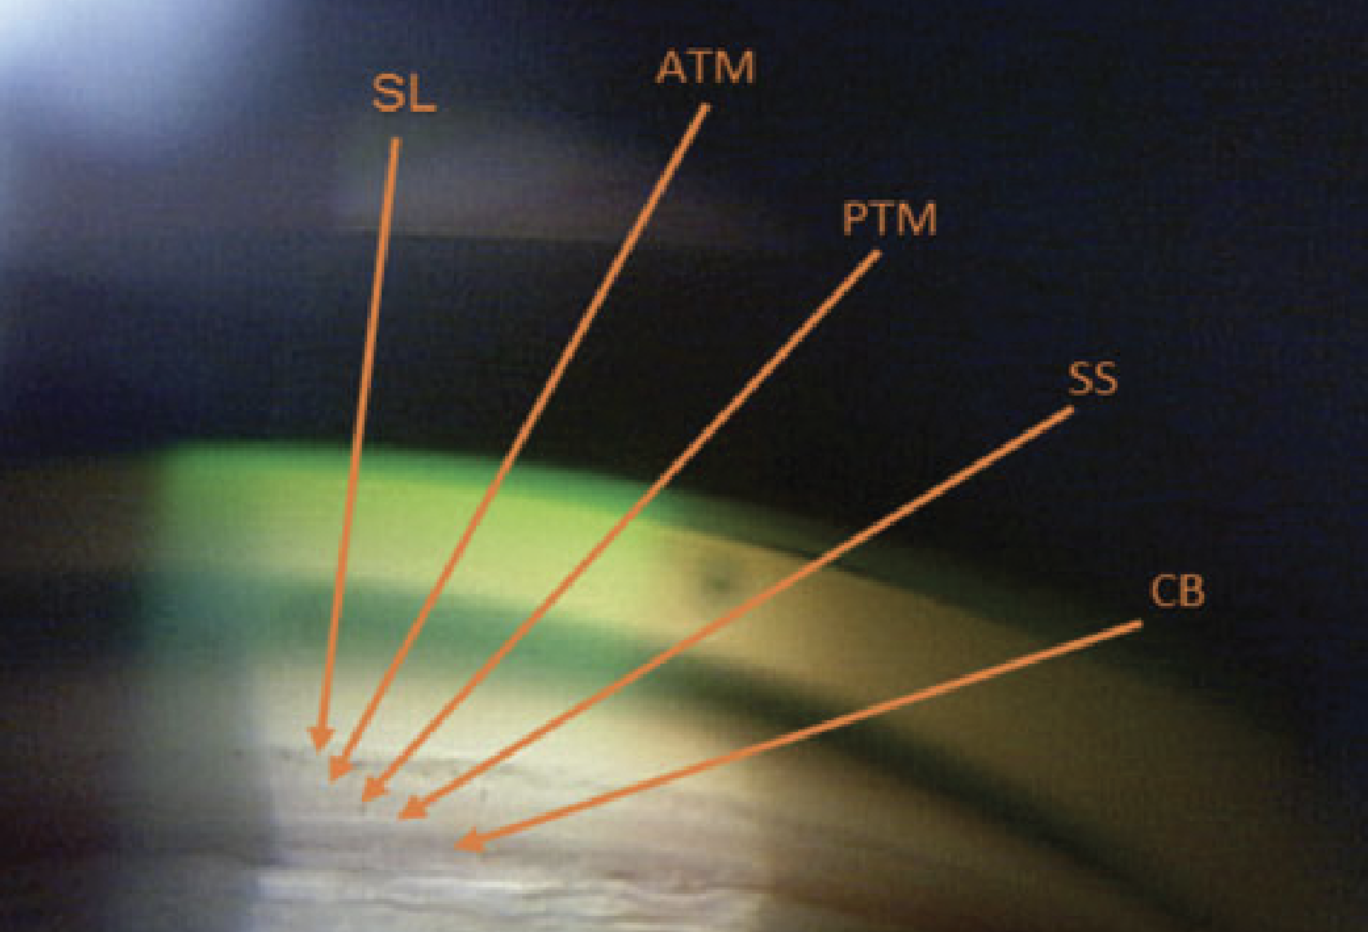 Fig. 2. The ciliary body is the most posterior structure visible, followed by the scleral spur, posterior TM, anterior TM and, finally, Schwalbe’s line.